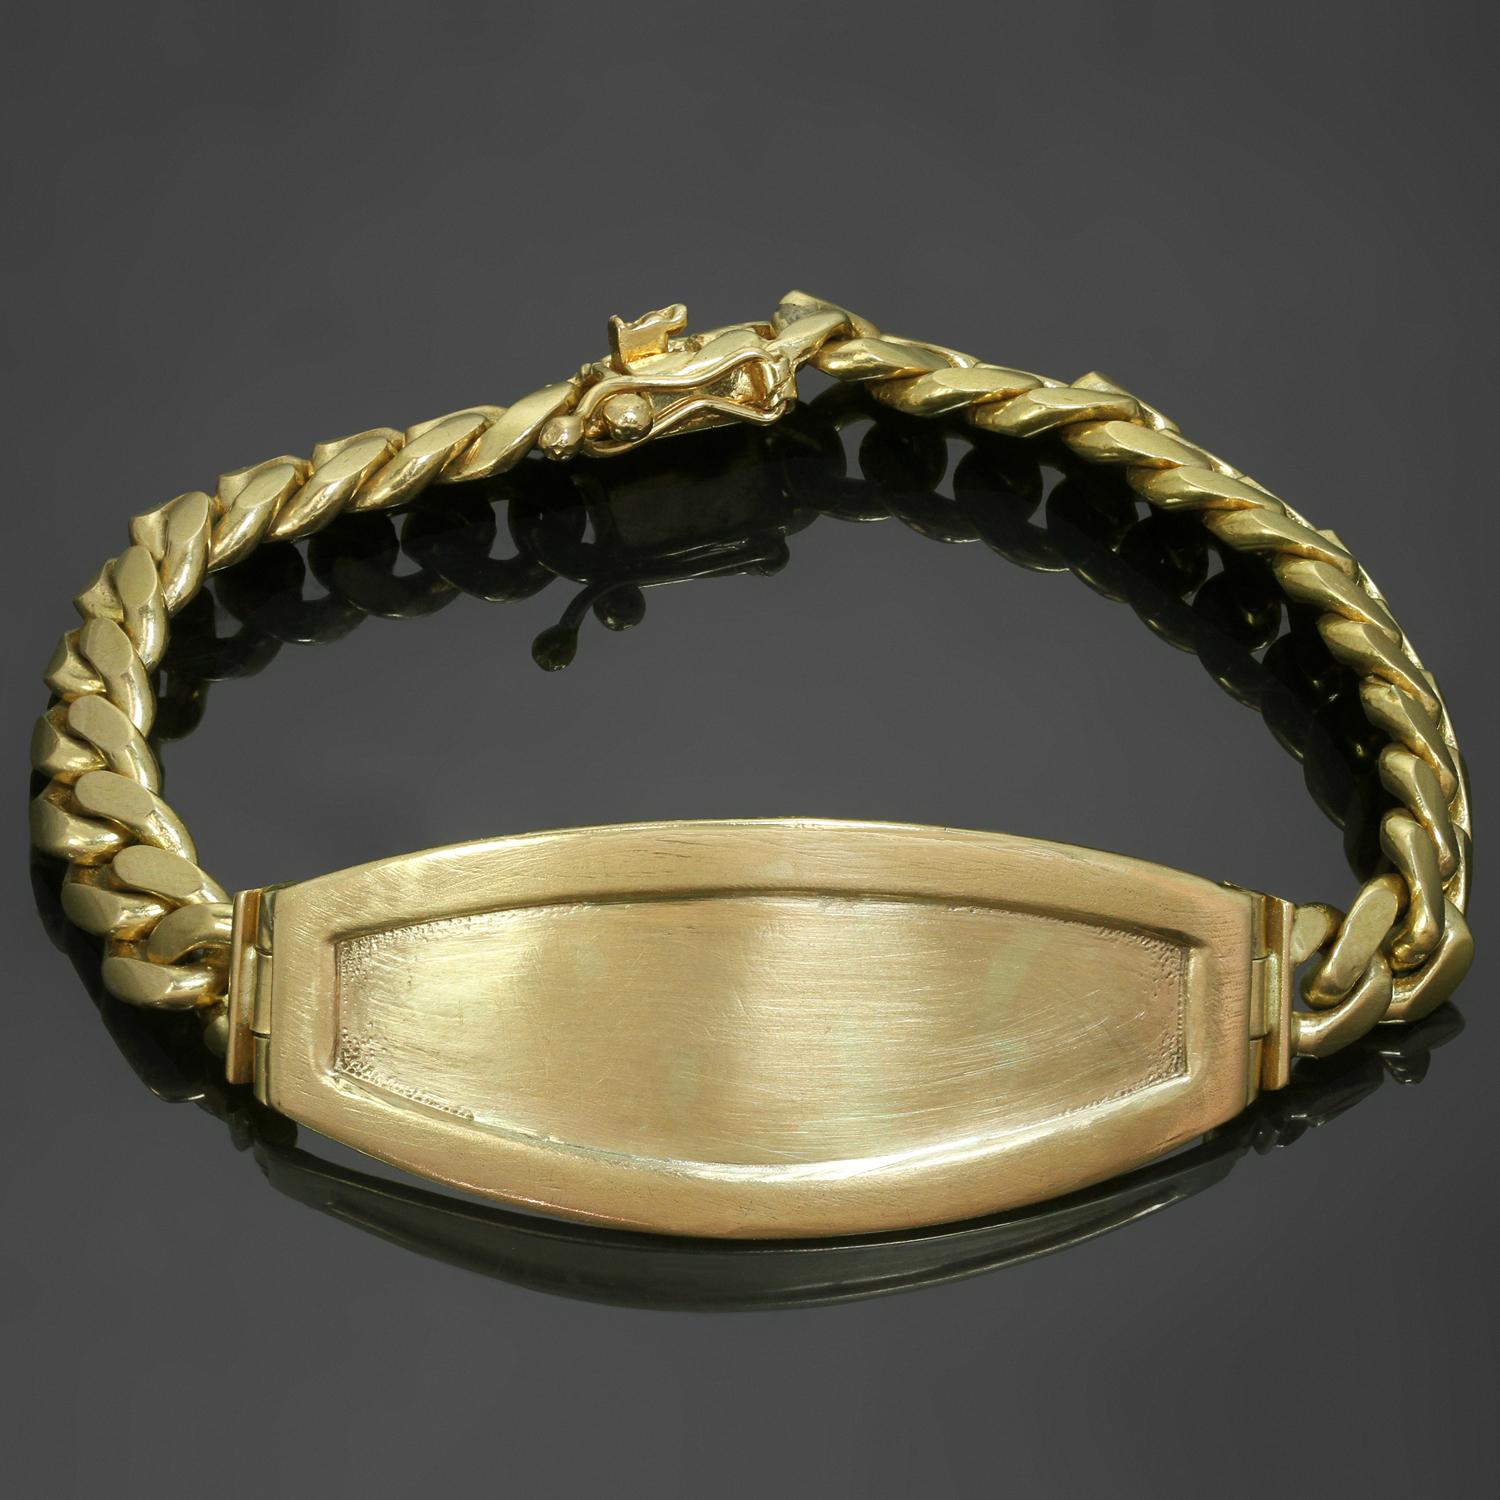 This classic vintage unisex ID bracelet is crafted in 18k yellow gold. made in United States circa 1980s. Measurements: 7.5